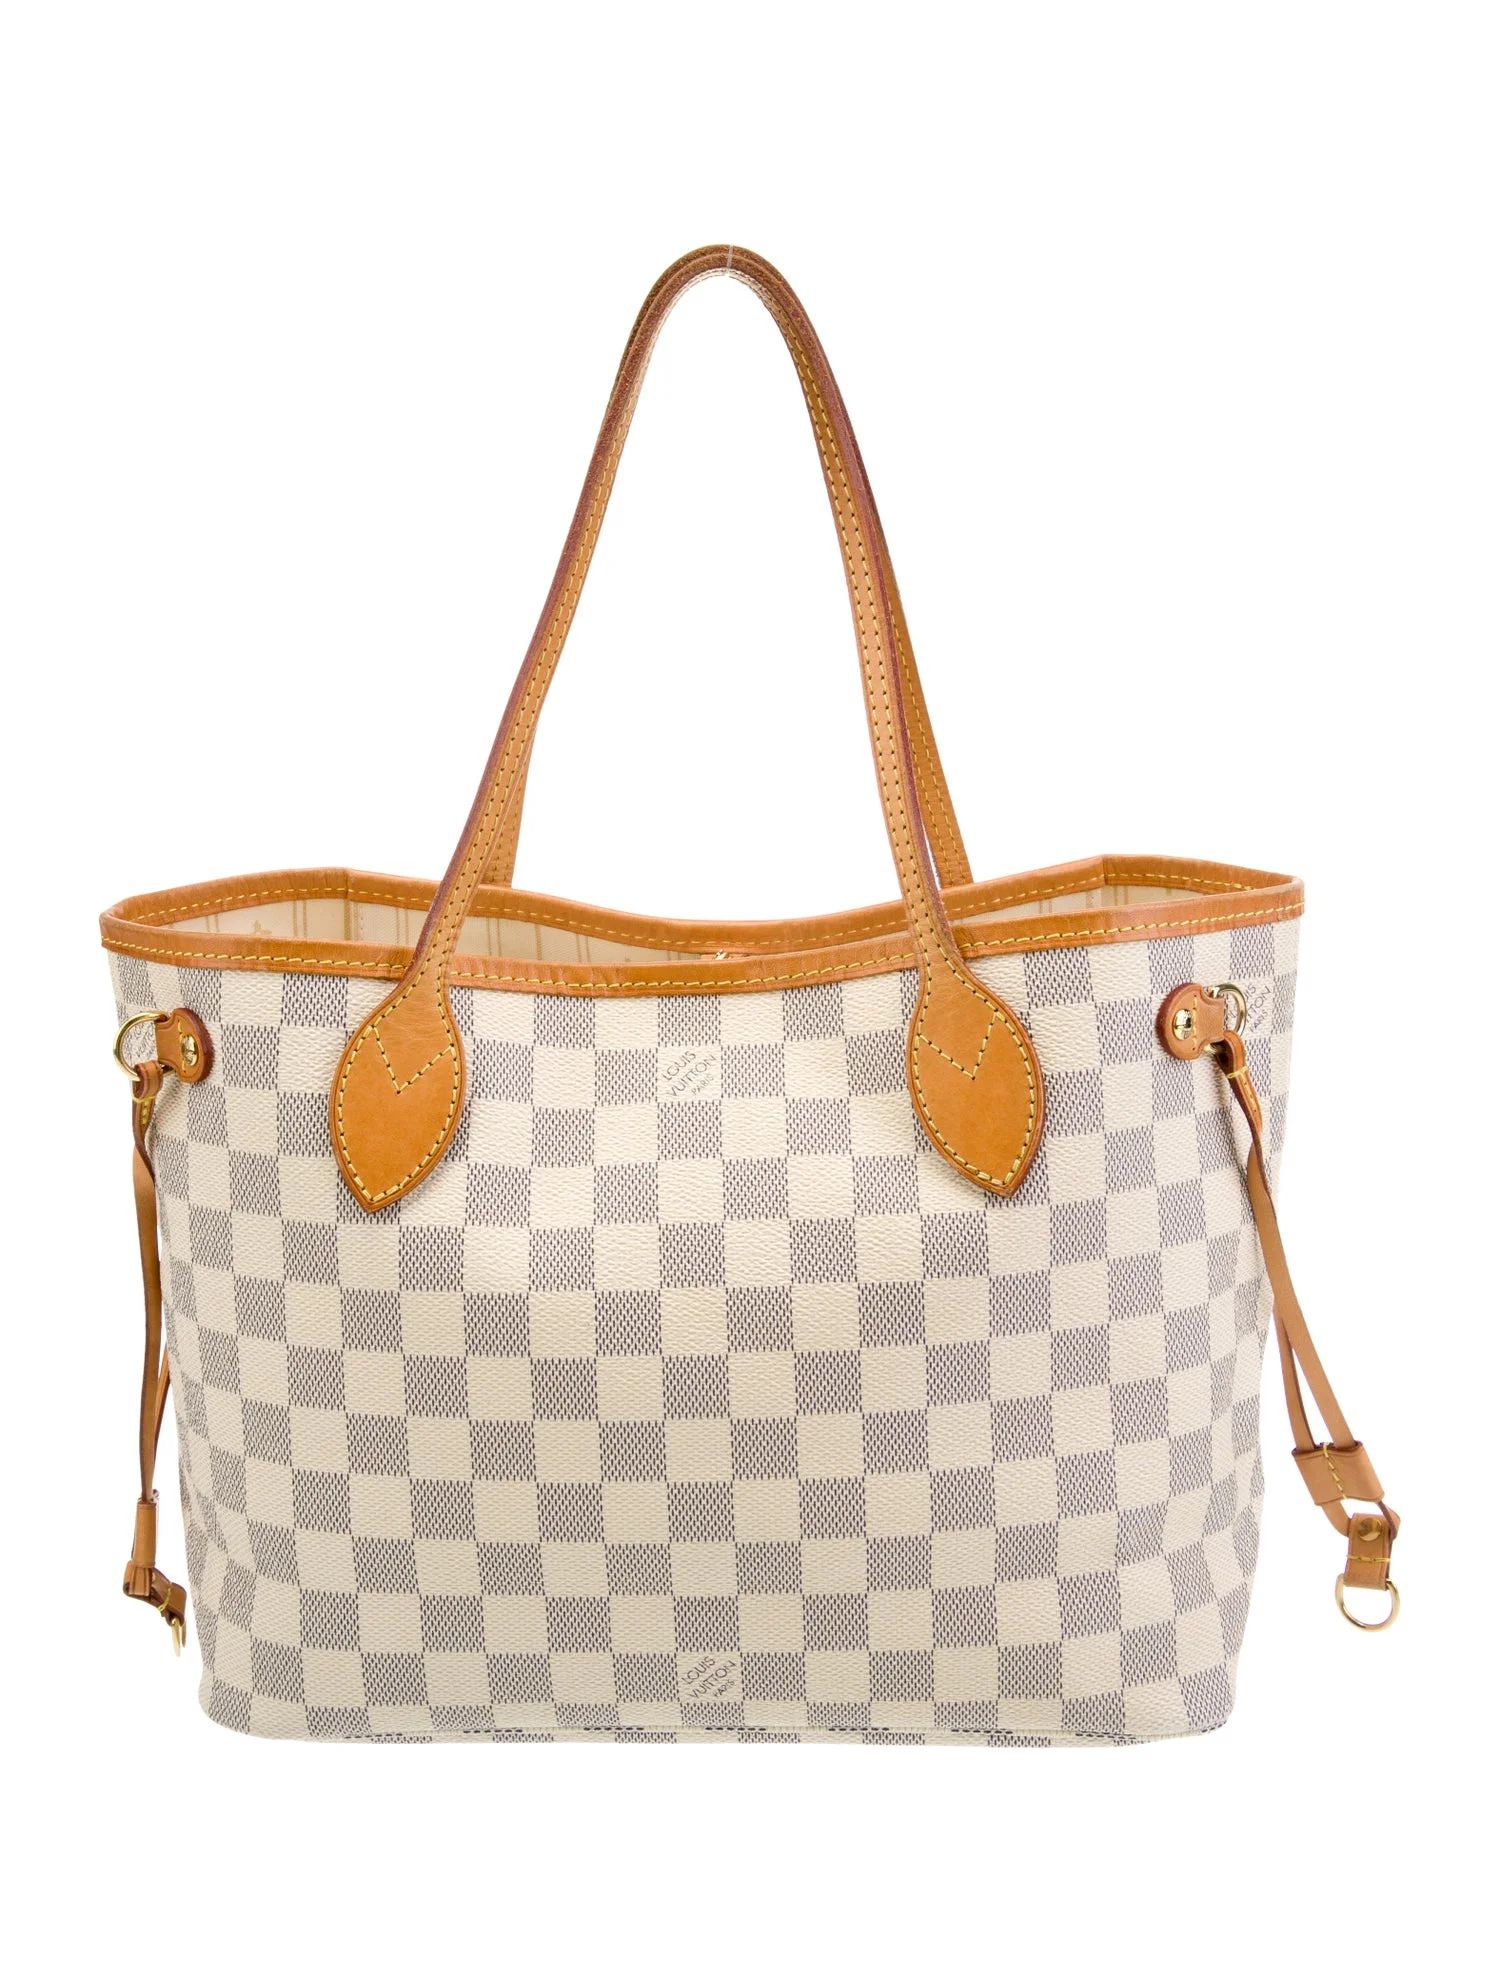 Damier Azur Neverfull PM | The RealReal